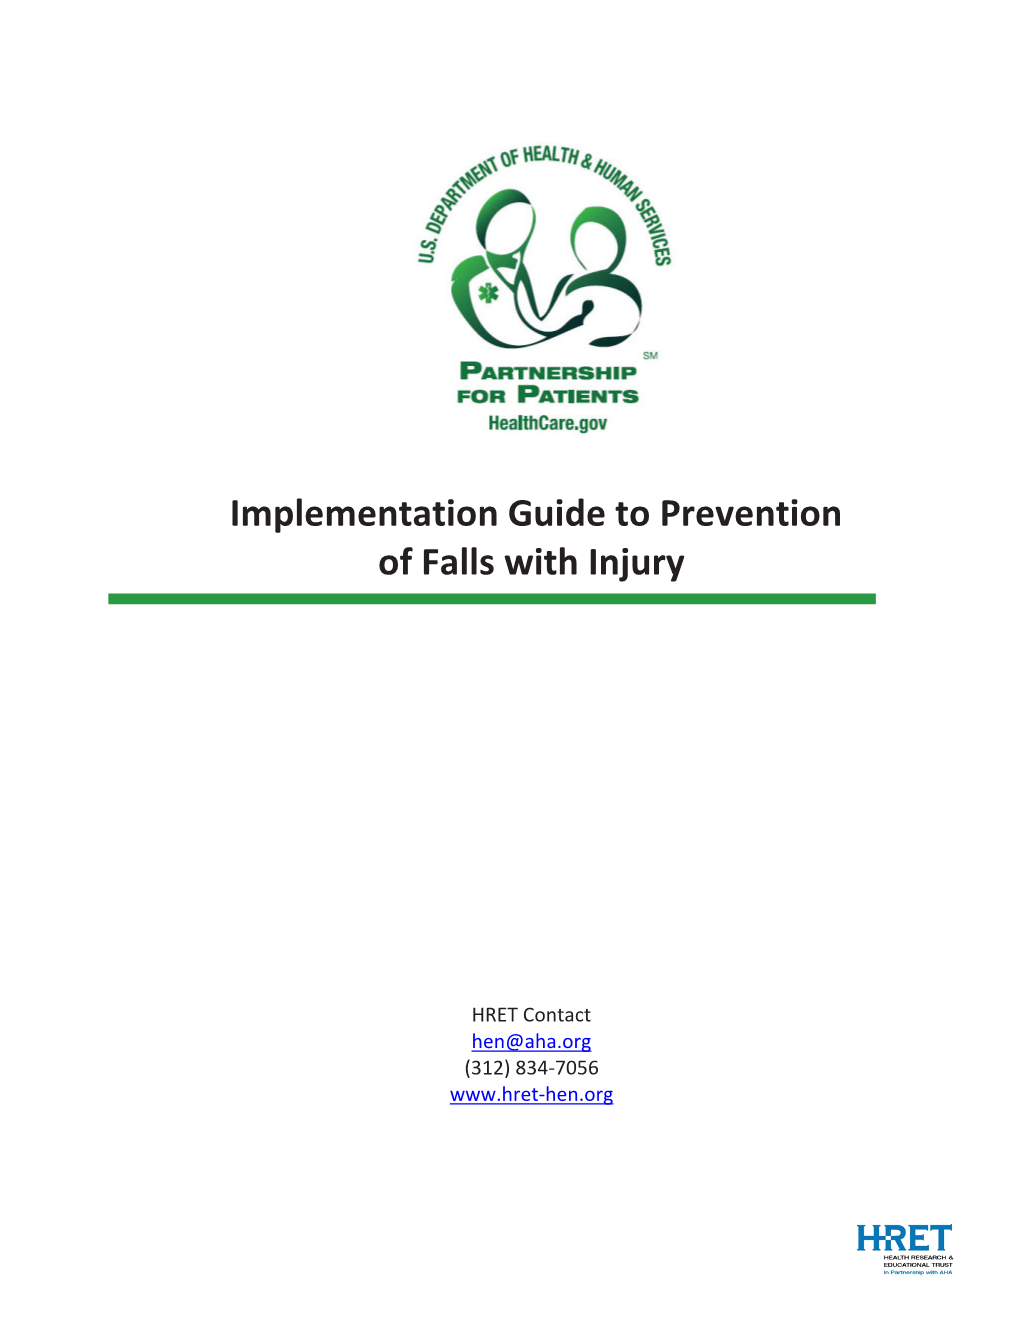 Implementation Guide to Prevention of Falls with Injury